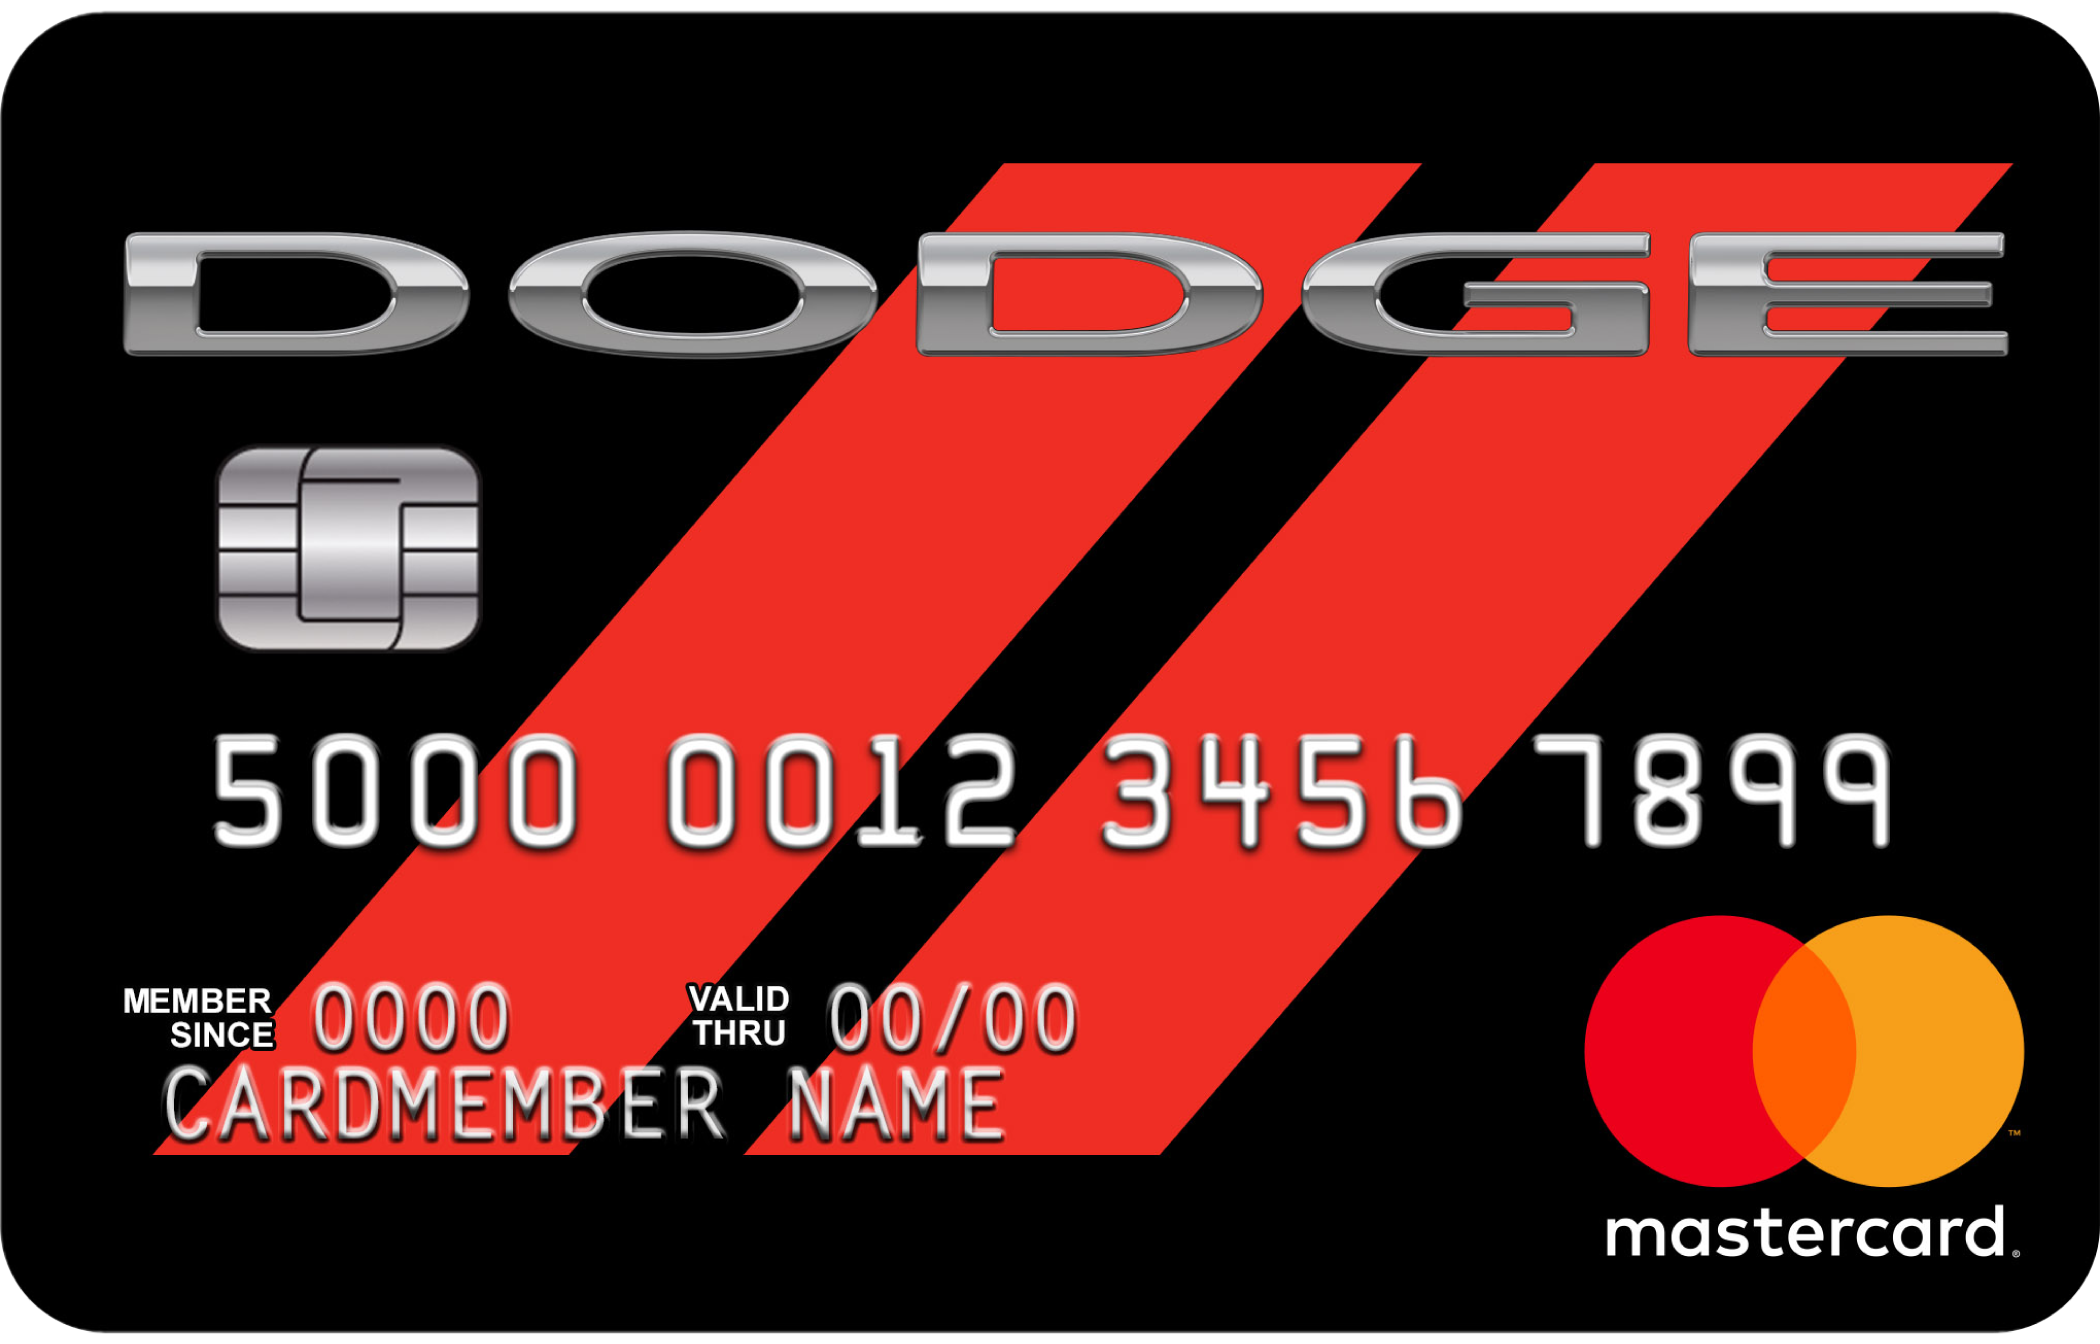 features-benefits-dodge-mastercard-first-bankcard